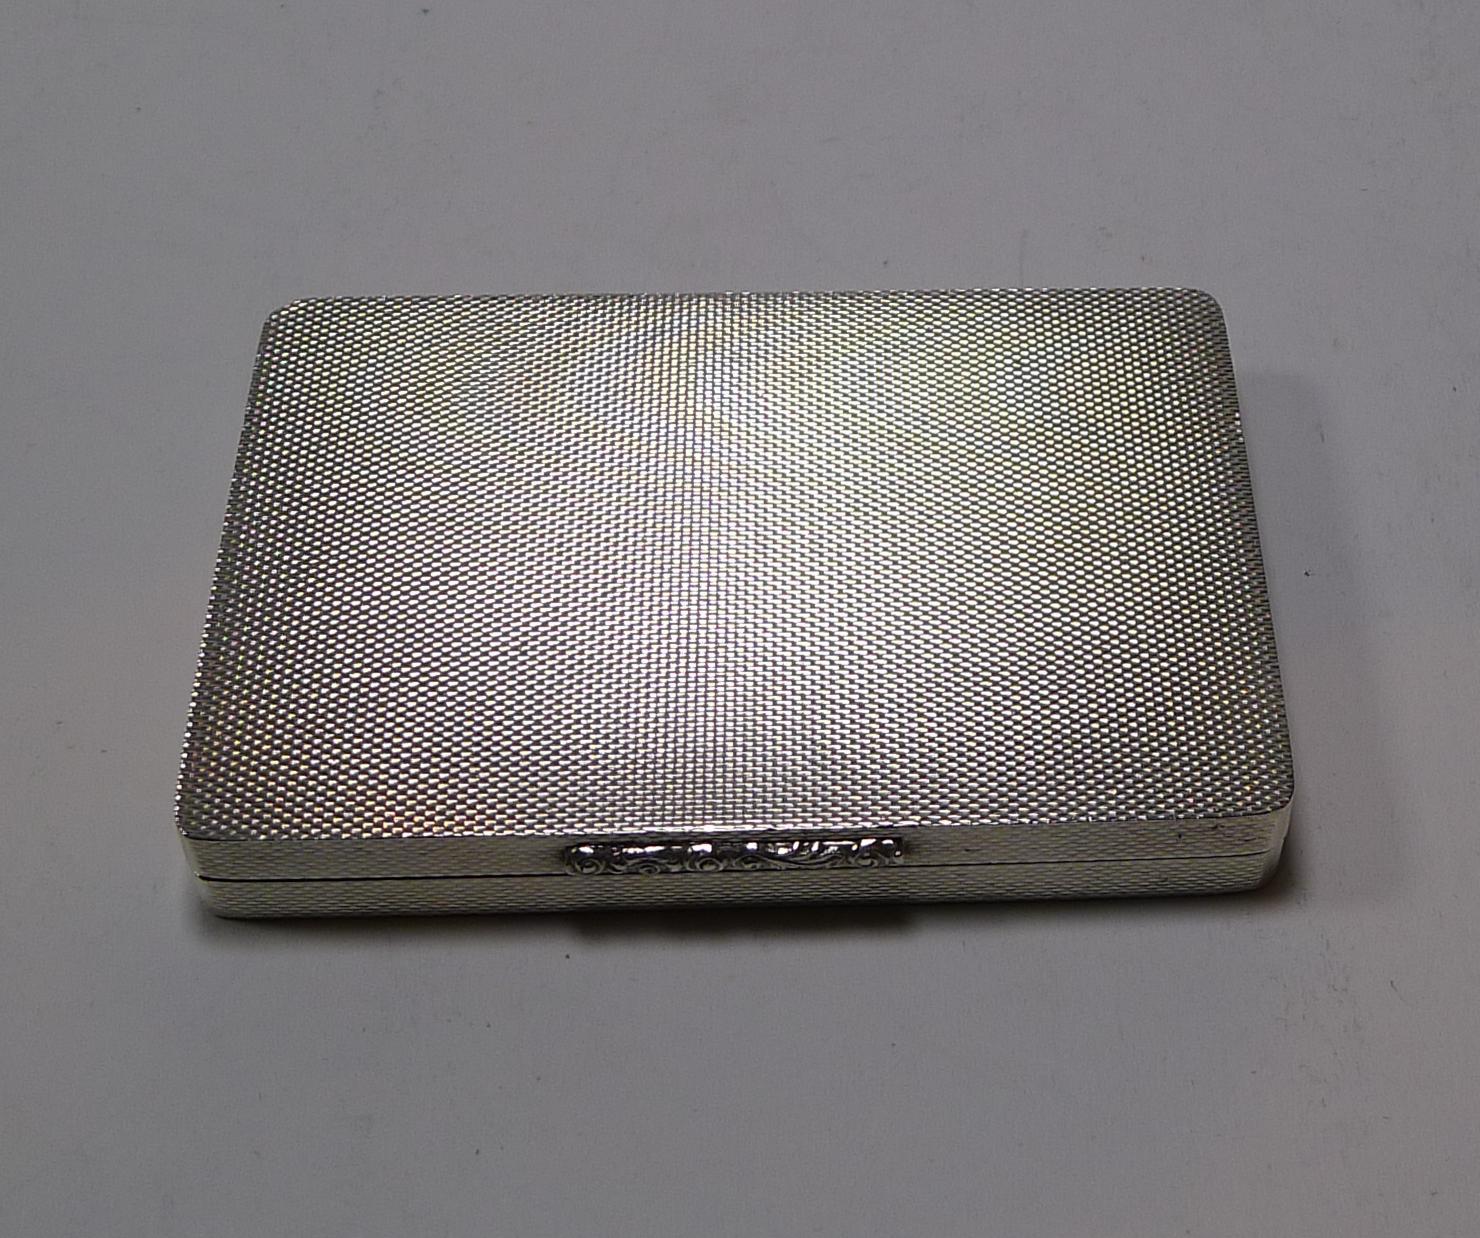 Quality English Sterling Silver Pill / Snuff Box 1946 For Sale 2